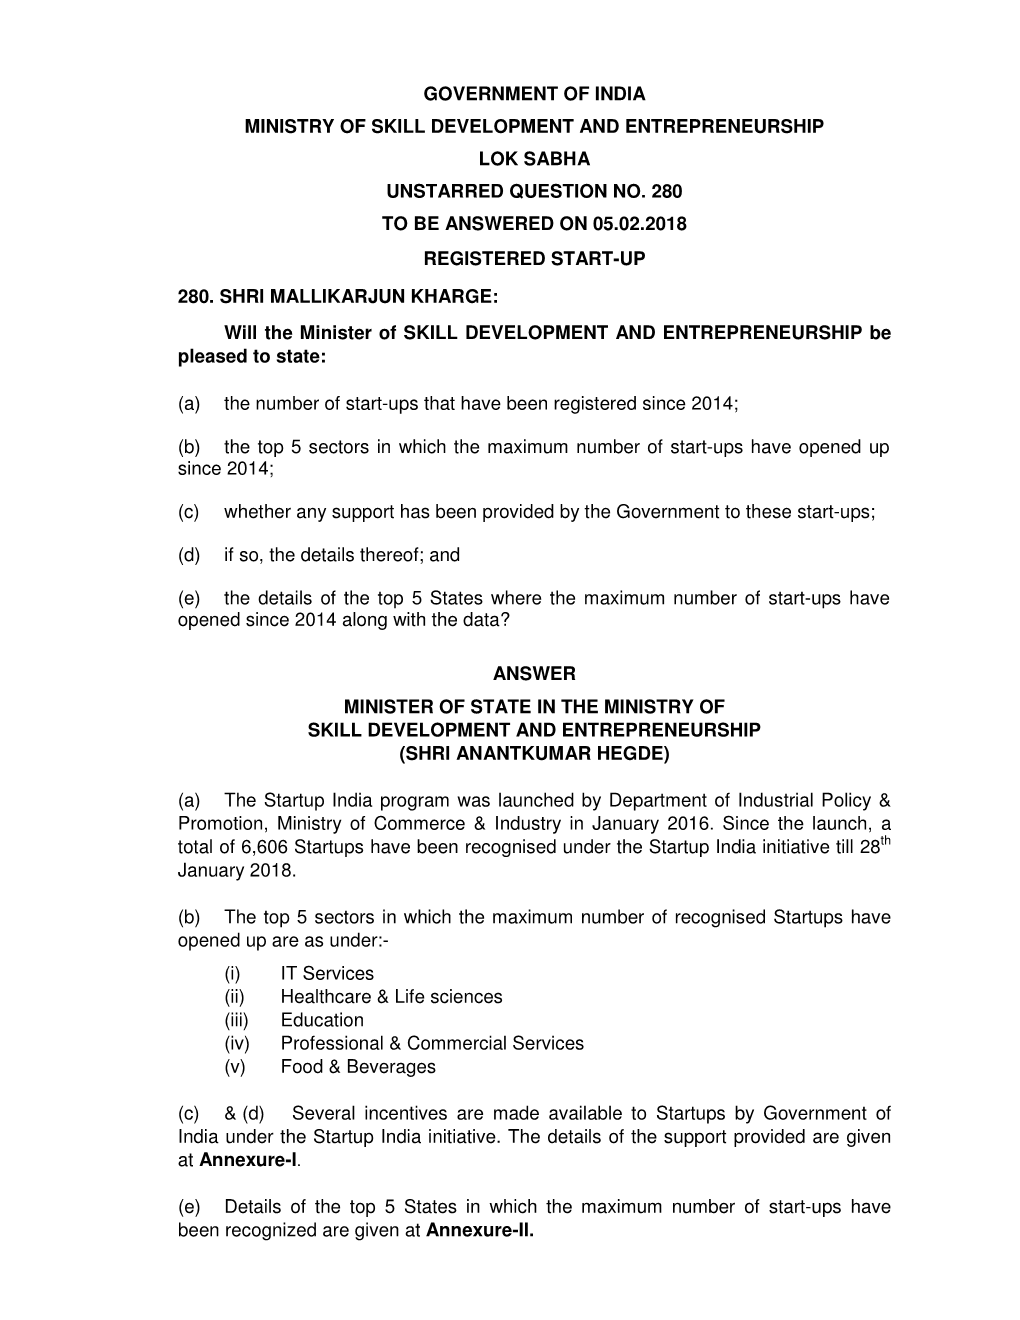 Government of India Ministry of Skill Development and Entrepreneurship Lok Sabha Unstarred Question No. 280 to Be Answered on 05.02.2018